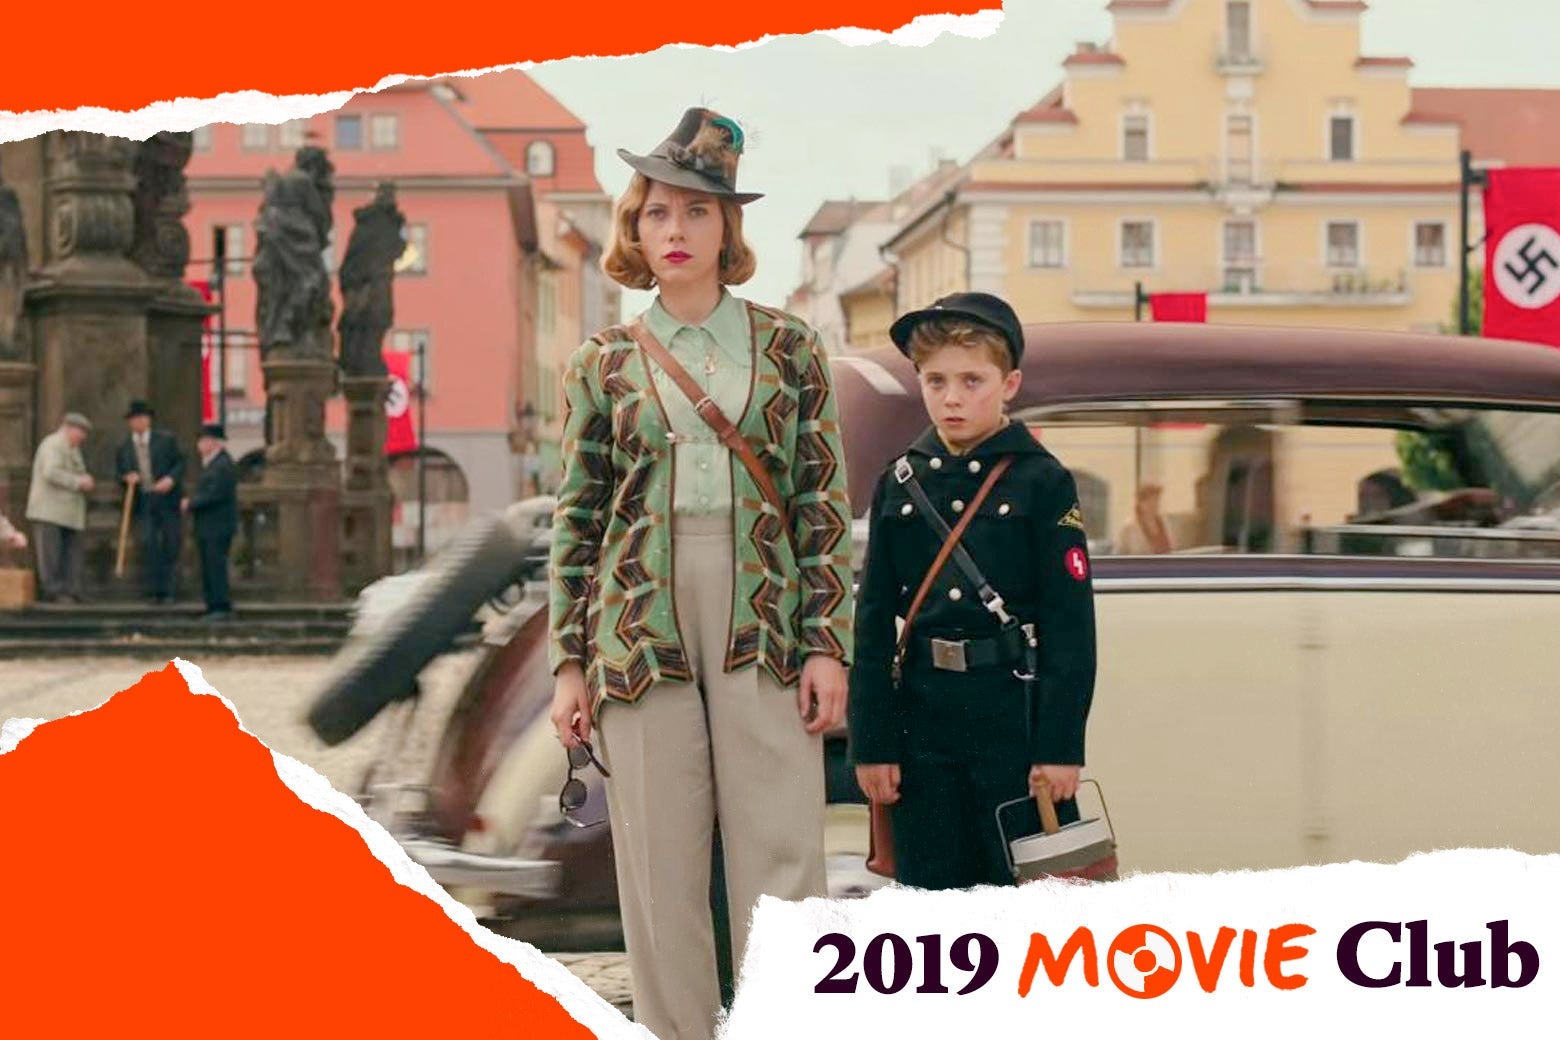 Scarlett Johansson stands next to the Jojo actor in a town square in a still from Jojo Rabbit. Text in the corner says, "2019 Movie Club."